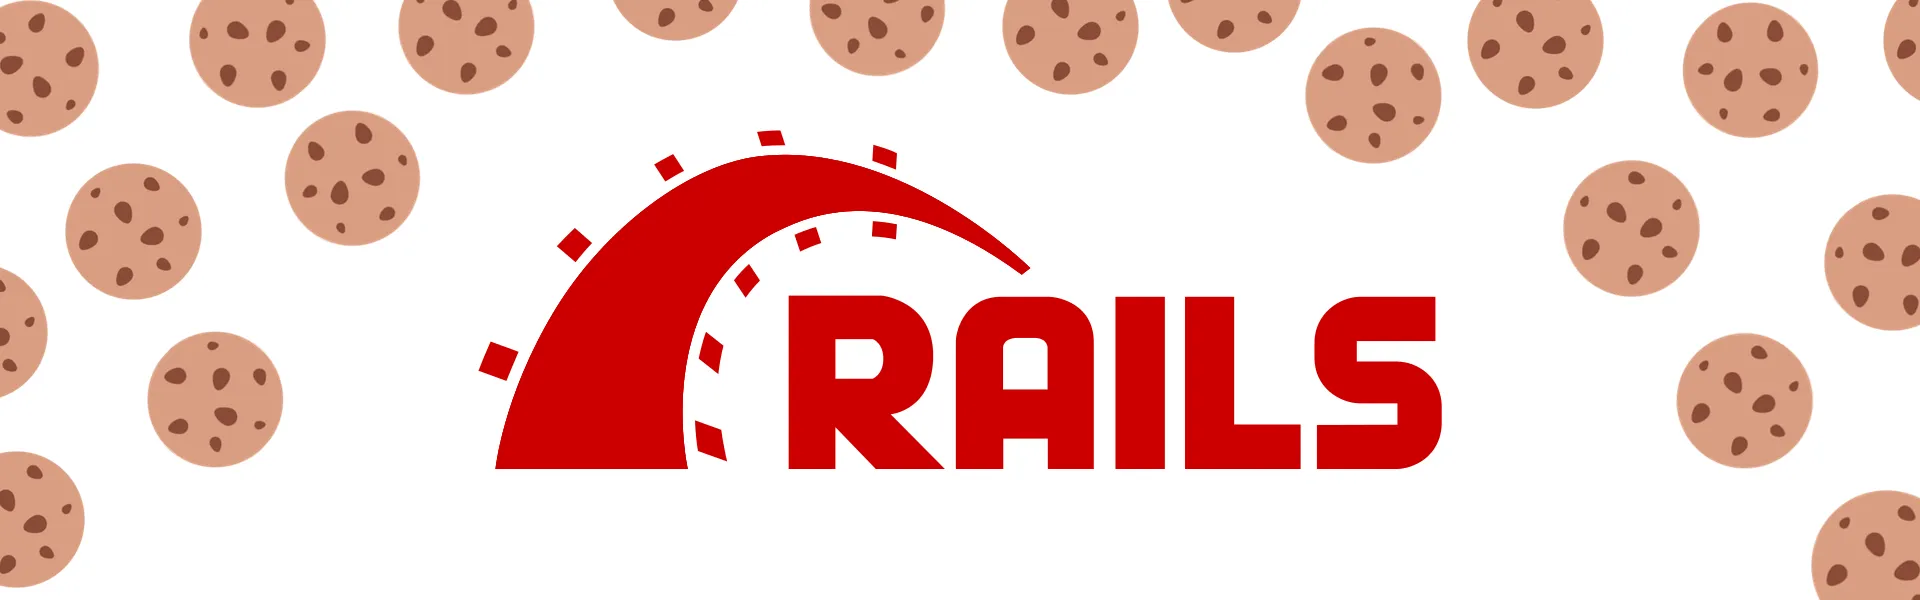 The Ruby on Rails logo surrounded by cookies